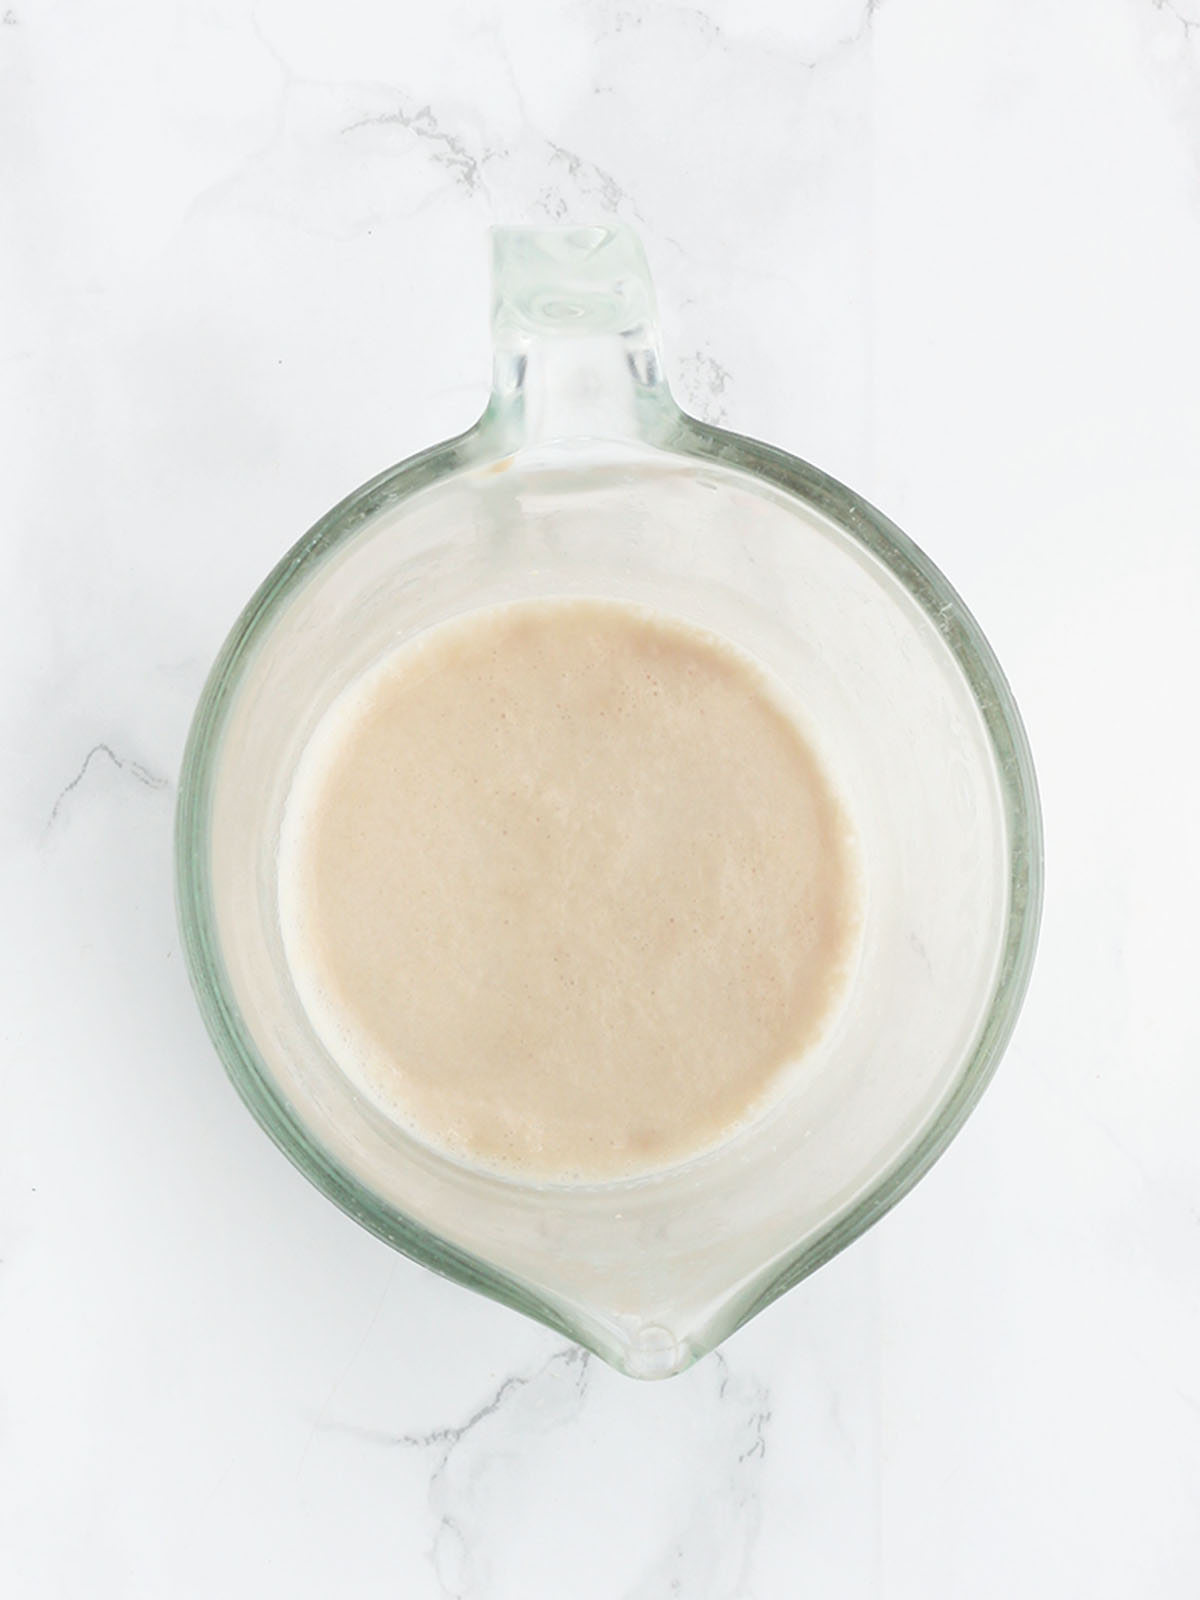 activated yeast with foam on top in a glass measuring cup